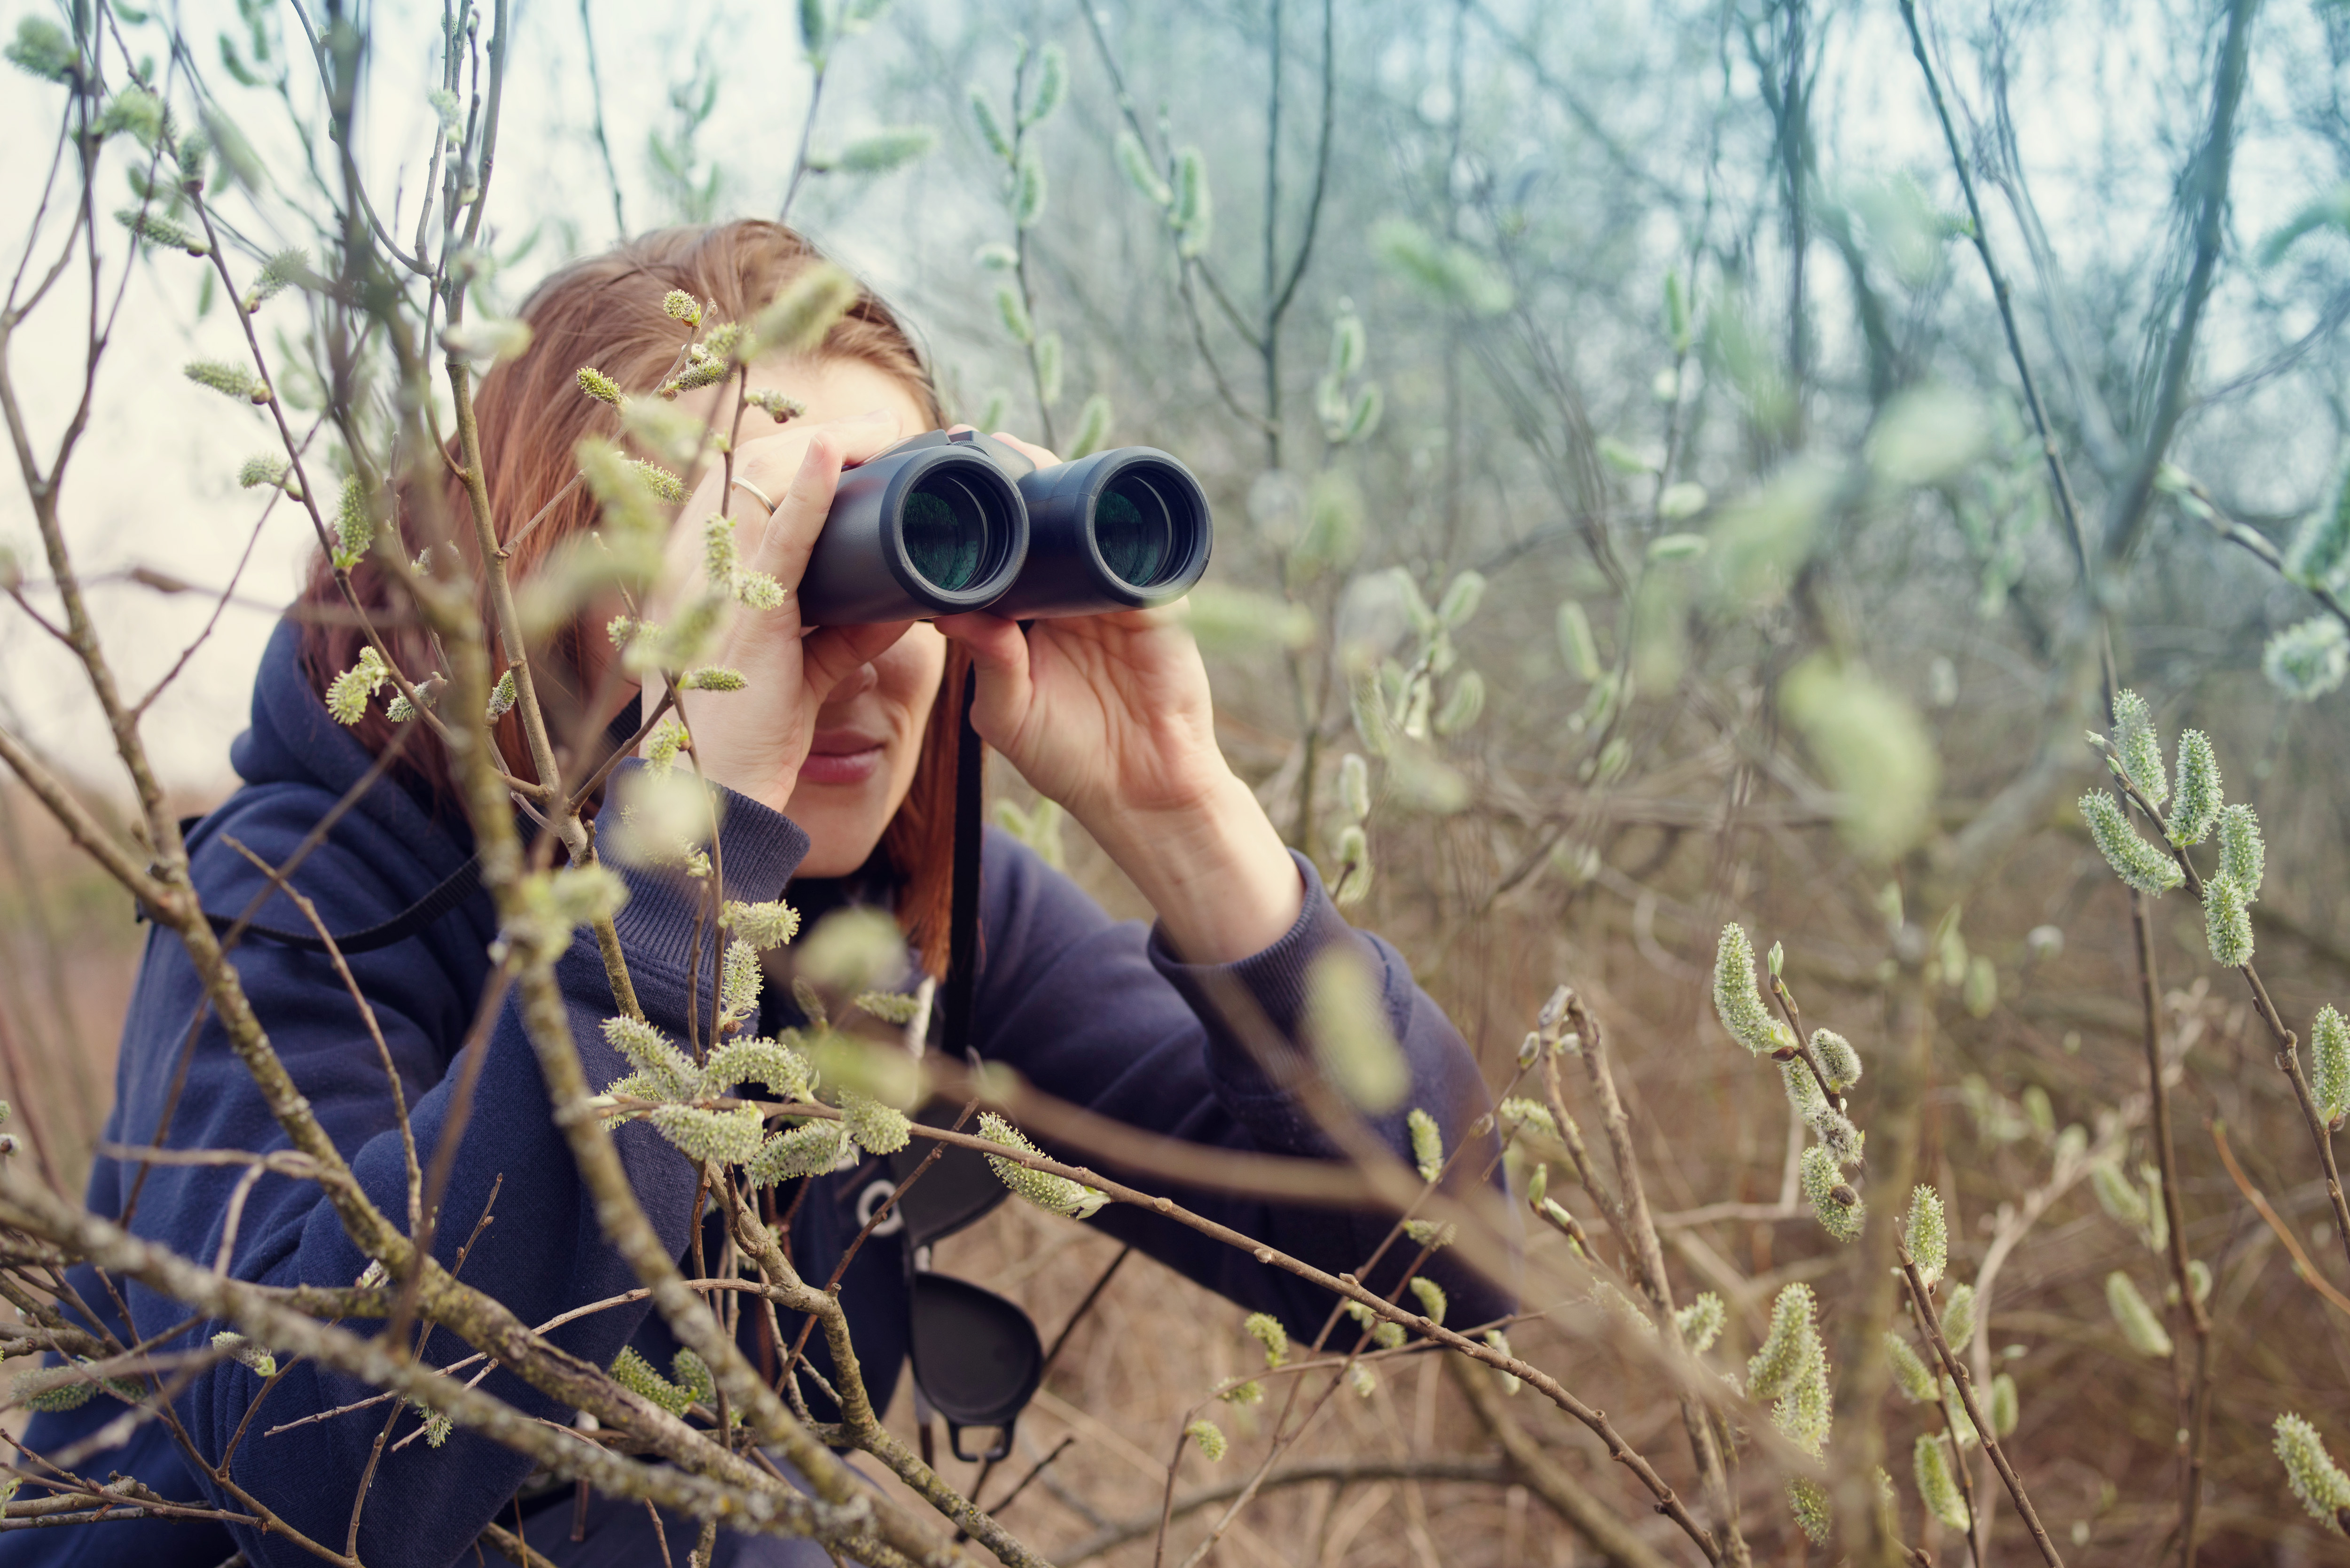 The great popularity of birding in NYC requires some special consideration for the benefit of both birds and fellow birders. Photo: Savitskaya Iryna/Shutterstock